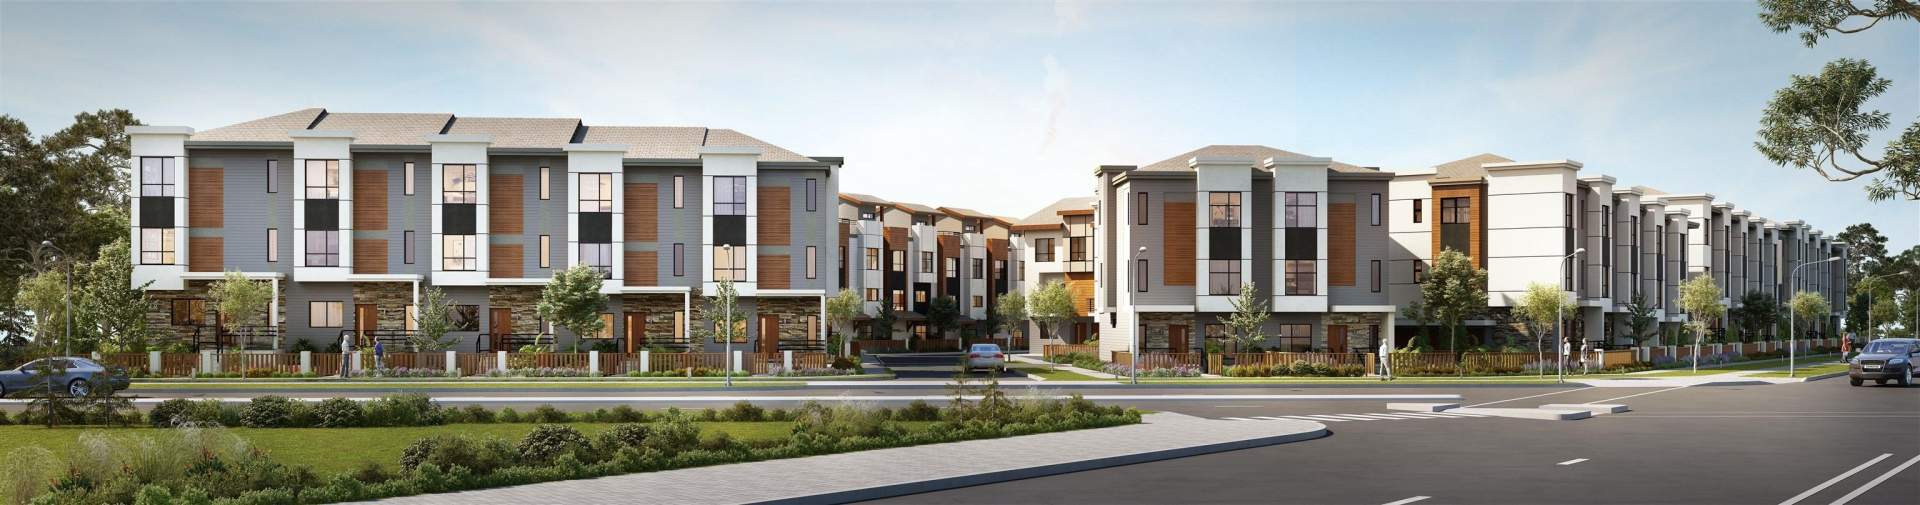 Horizon Townhomes by Apcon – Plans, Availability, Prices